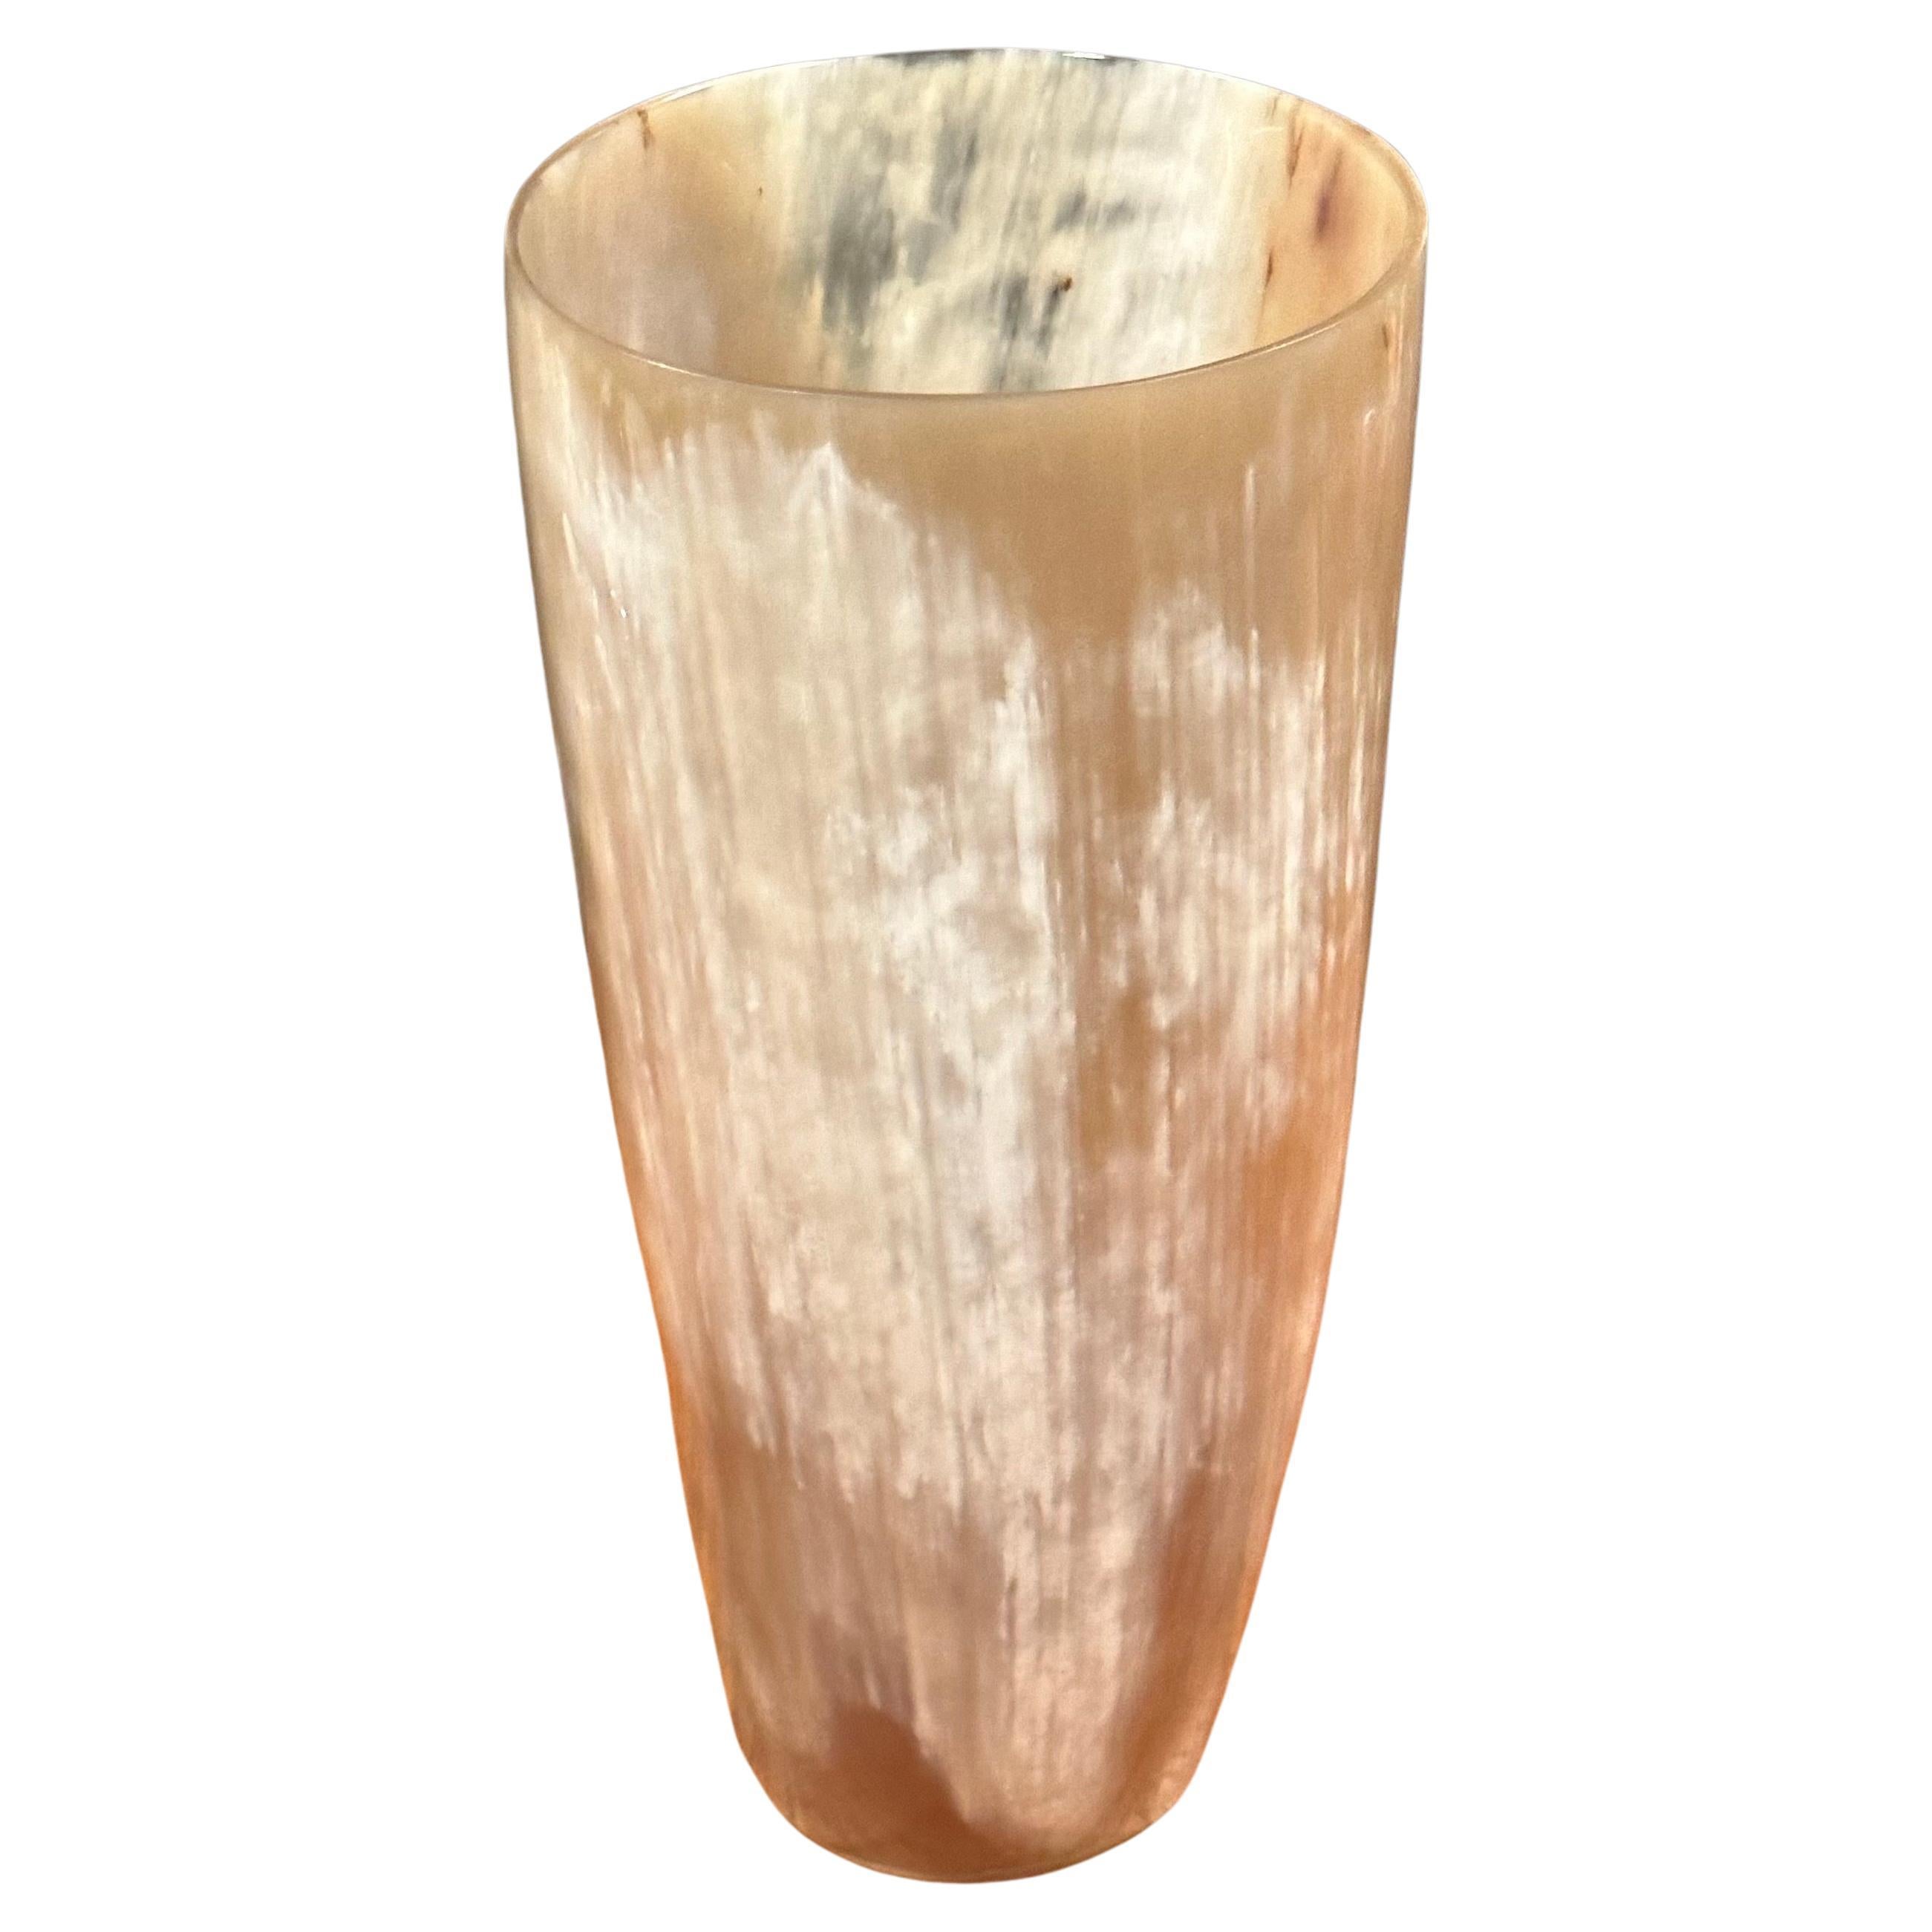 Gorgeous well crafted, tall horn vase by Arcahorn of Italy, circa 2000s. The piece is in very good condition and measures 5